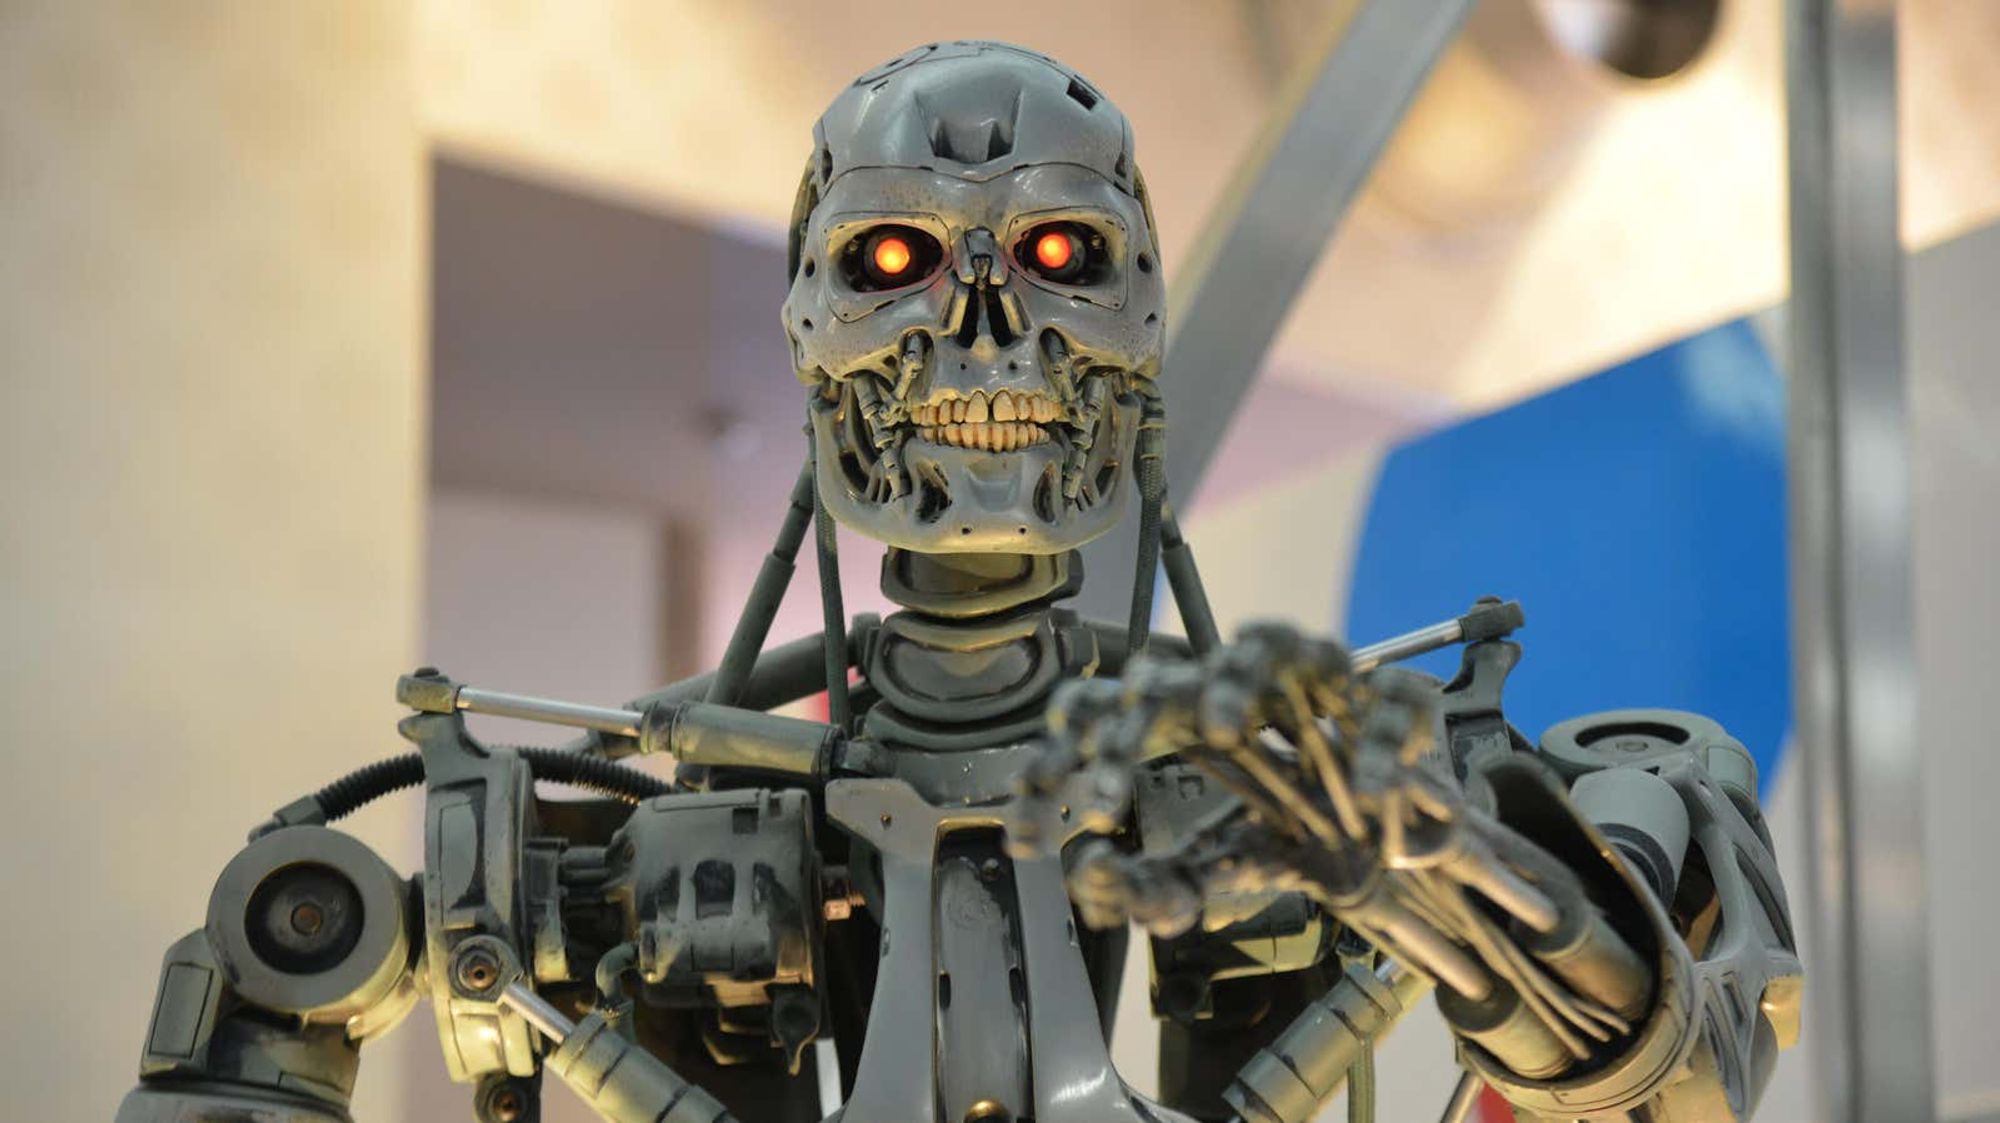 8 Signs That the AI 'Revolution' Is Spinning Out of Control